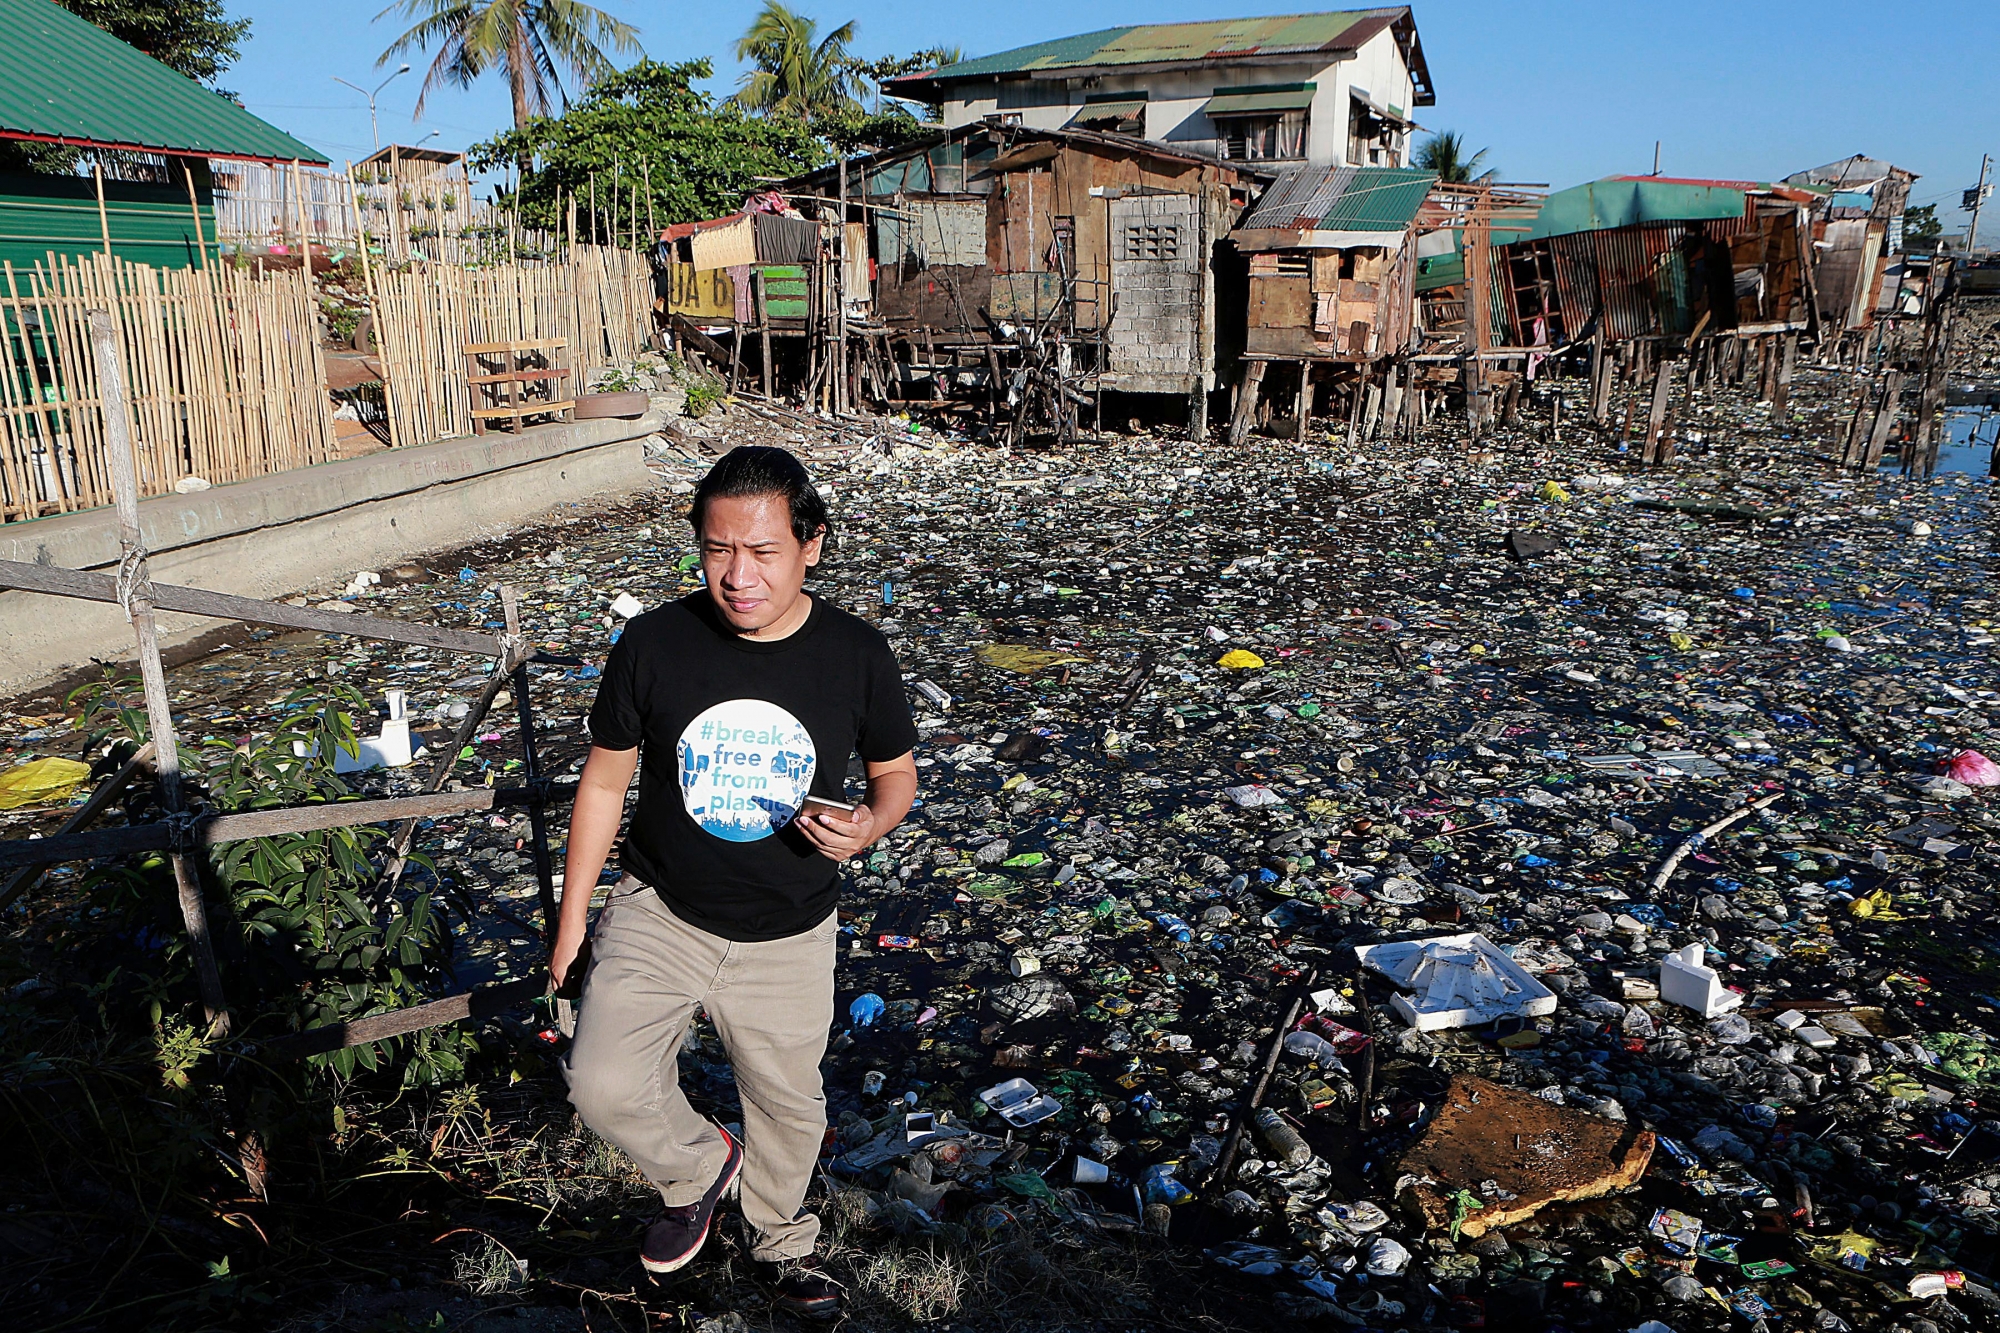 Global Anti Incineration Alliance Philippines Executive Director Froilan Grate walks on a trash-filled river in Barangay Bagumbayan North in Navotas City, Philippines. GP0STT1XY